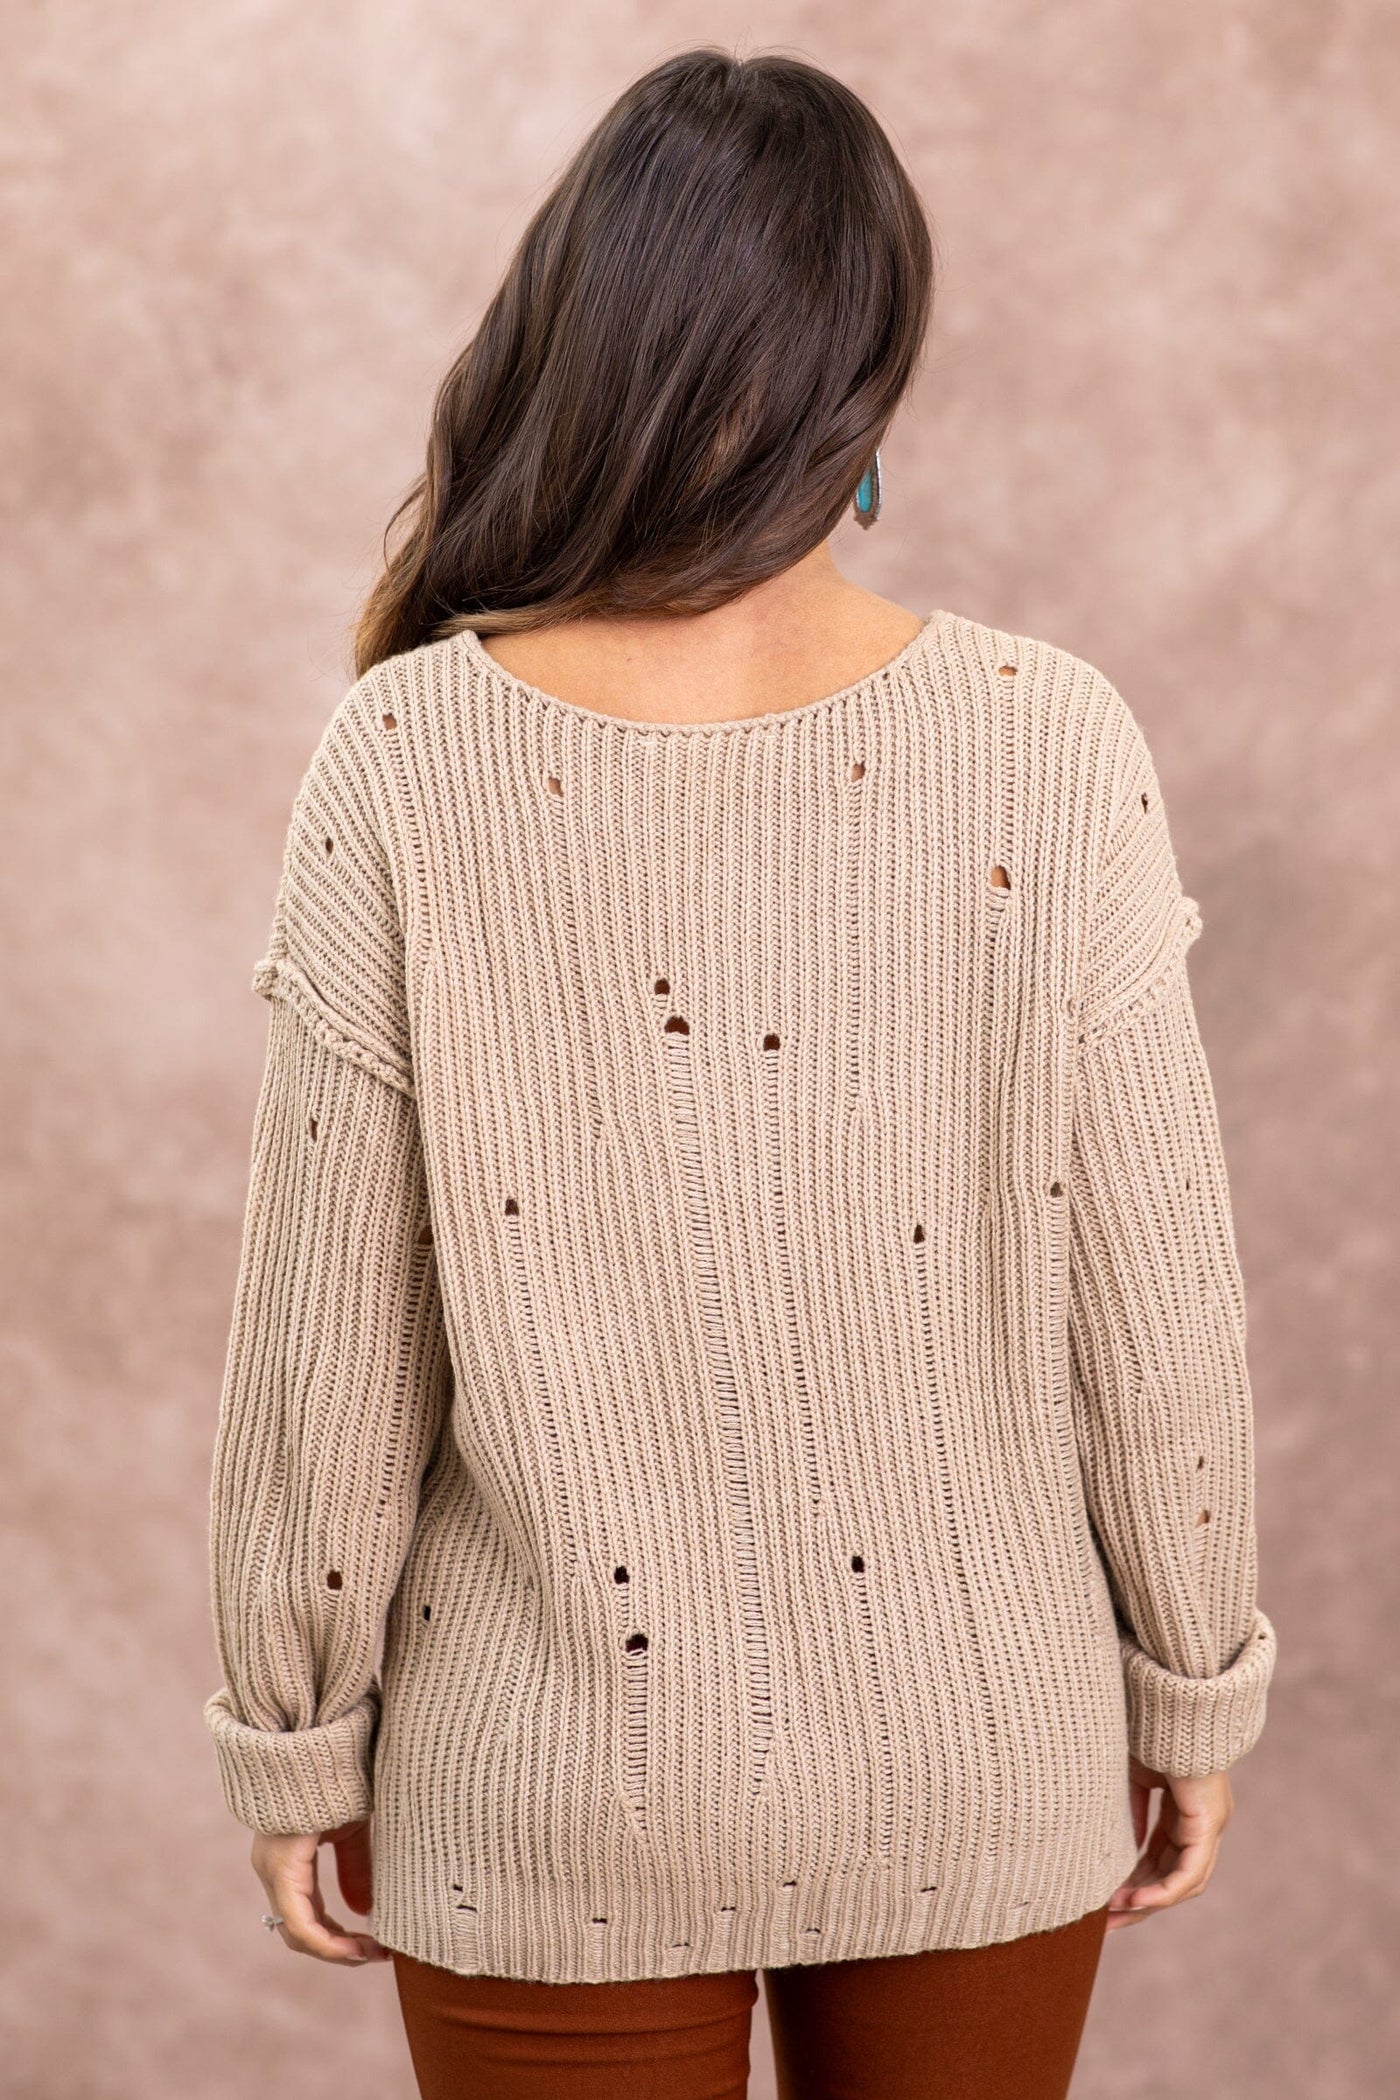 Tan Distressed Sweater - Filly Flair